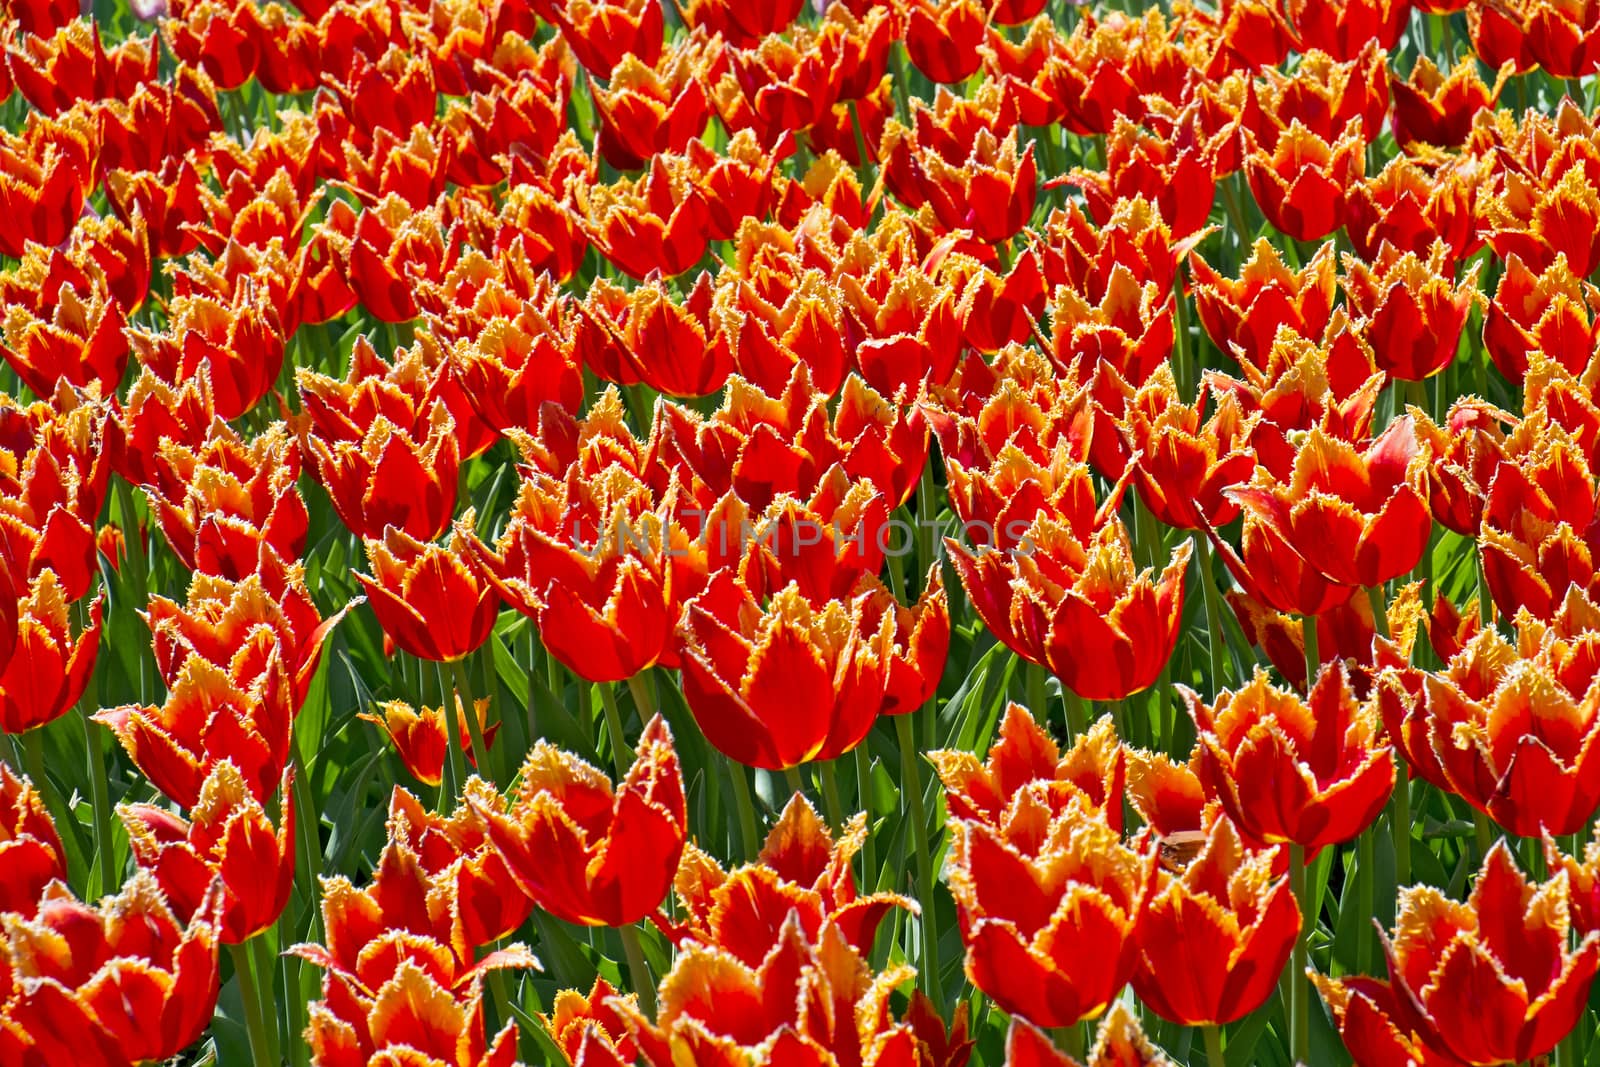 Red and yellow tulips with fringed bush petals for background.